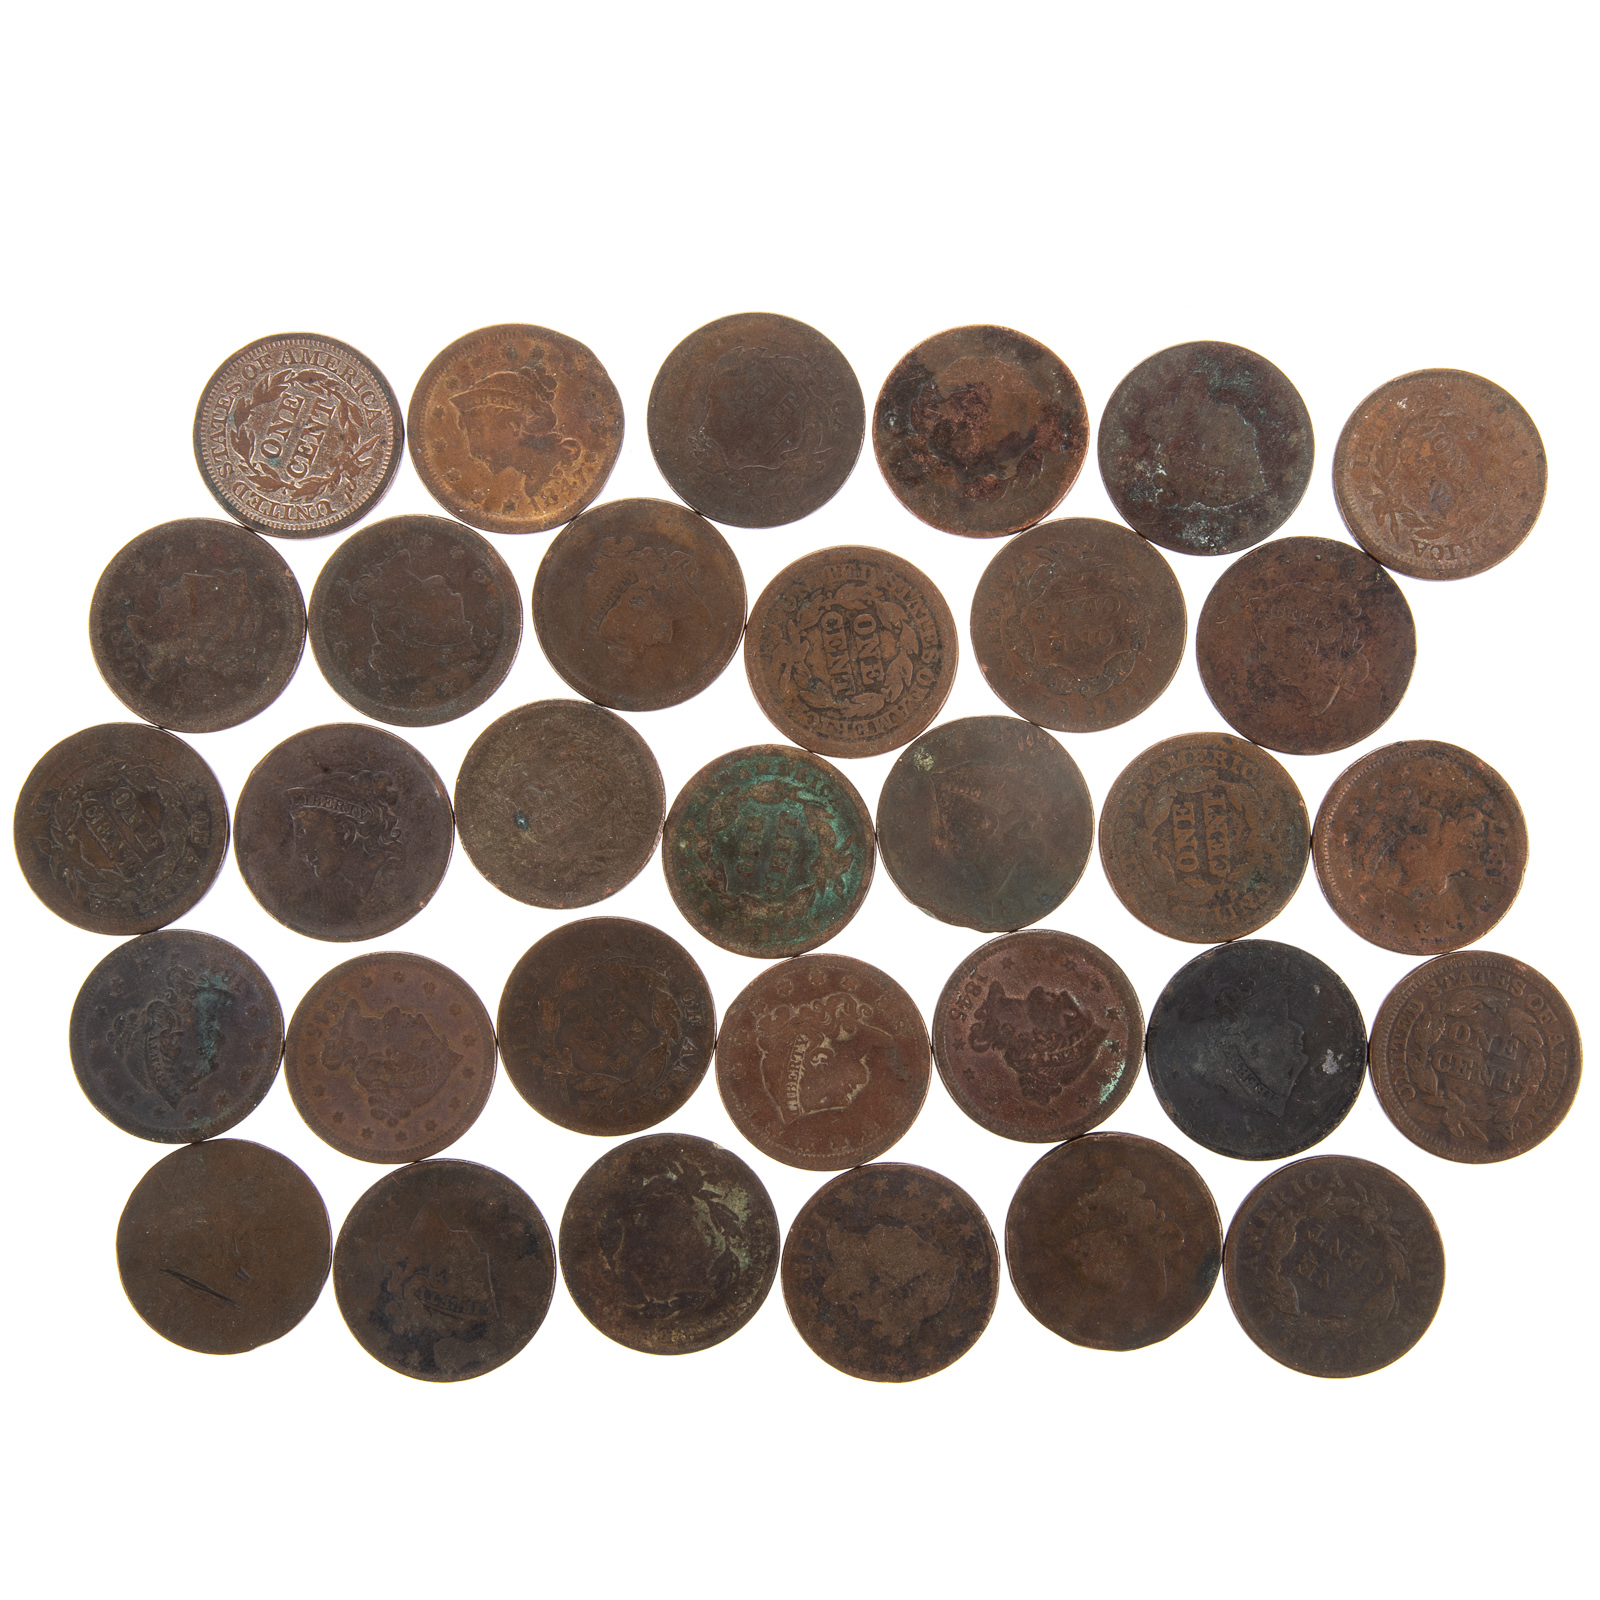 32 LESS THAN PERFECT LARGE CENTS 33418c